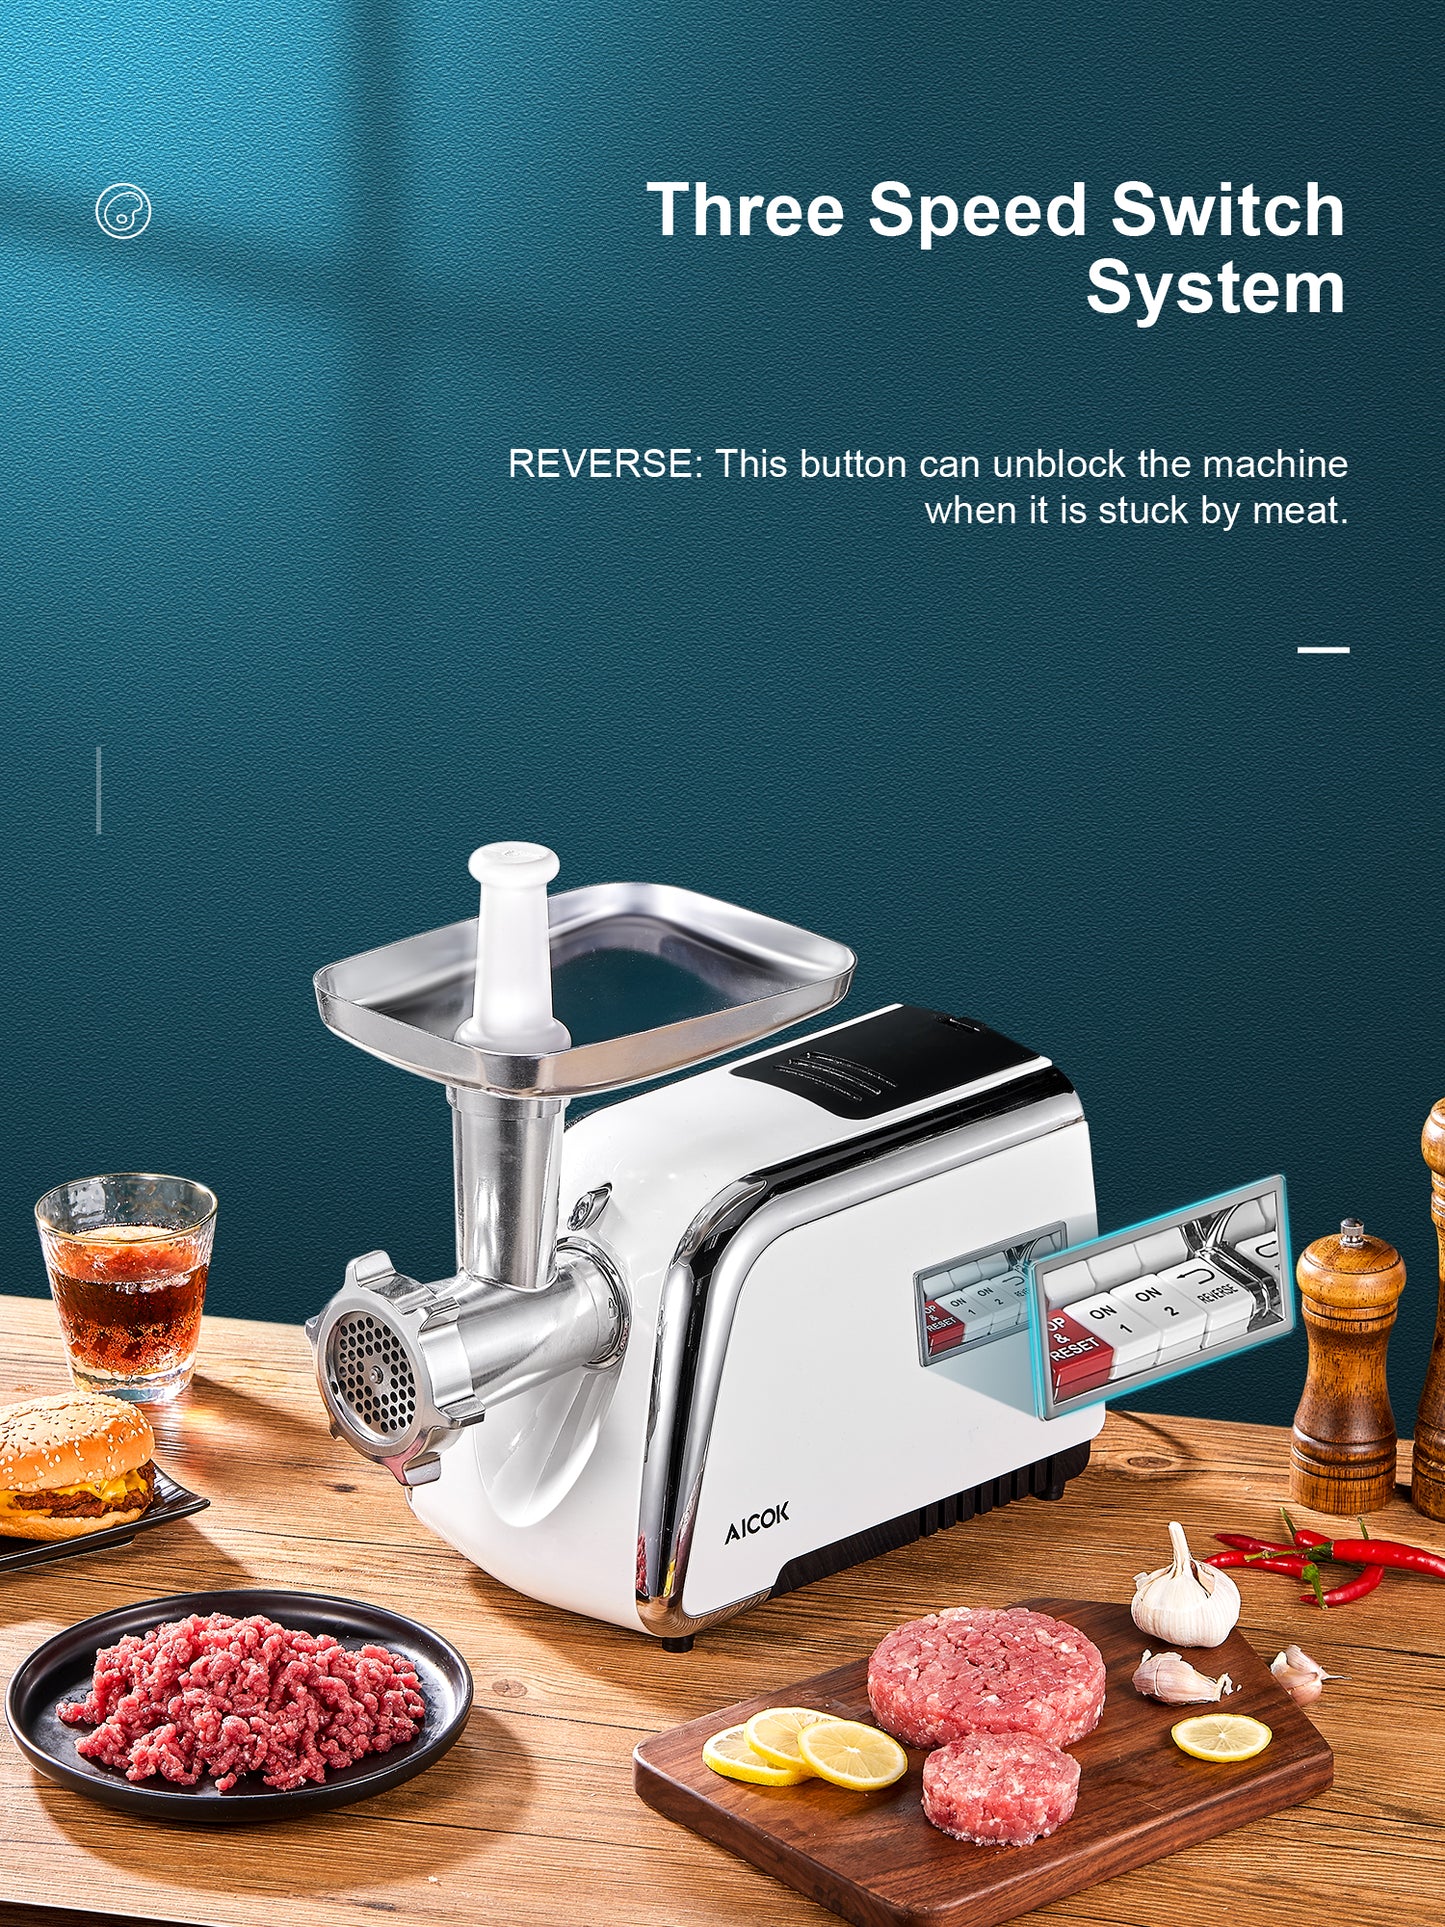 AICOK Electric Meat Grinder, [2500W Max] Sausage Stuffer with 4 Grinding Plates & 3 - S/S Blades, 2 Free Meat Claws, Cookie Shaper & 2 Burger-Slider Maker, 3 Speeds Control, Storage Box